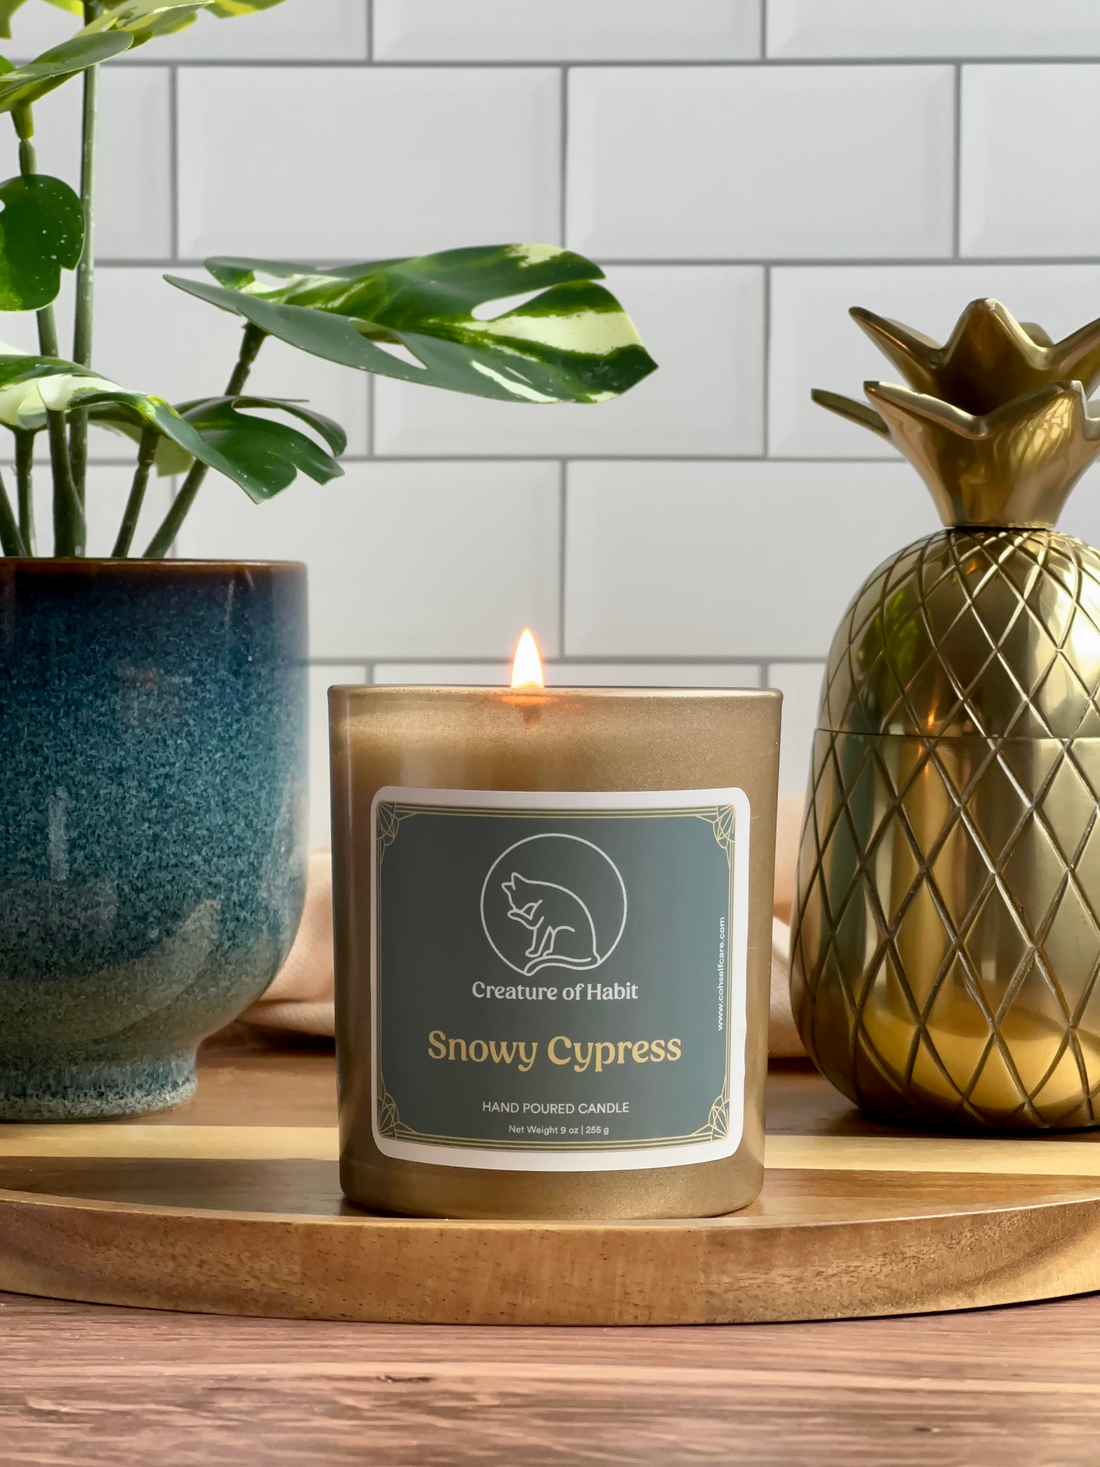 A lit soy candle within a golden vessel is placed on top of a wooden tray, next to a small houseplant and golden pineapple paperweight. The label is greyish cyan featuring the logo of a white cat silhouette, the name of the company Creature of Habit, and the scent name Snowy Cypress.